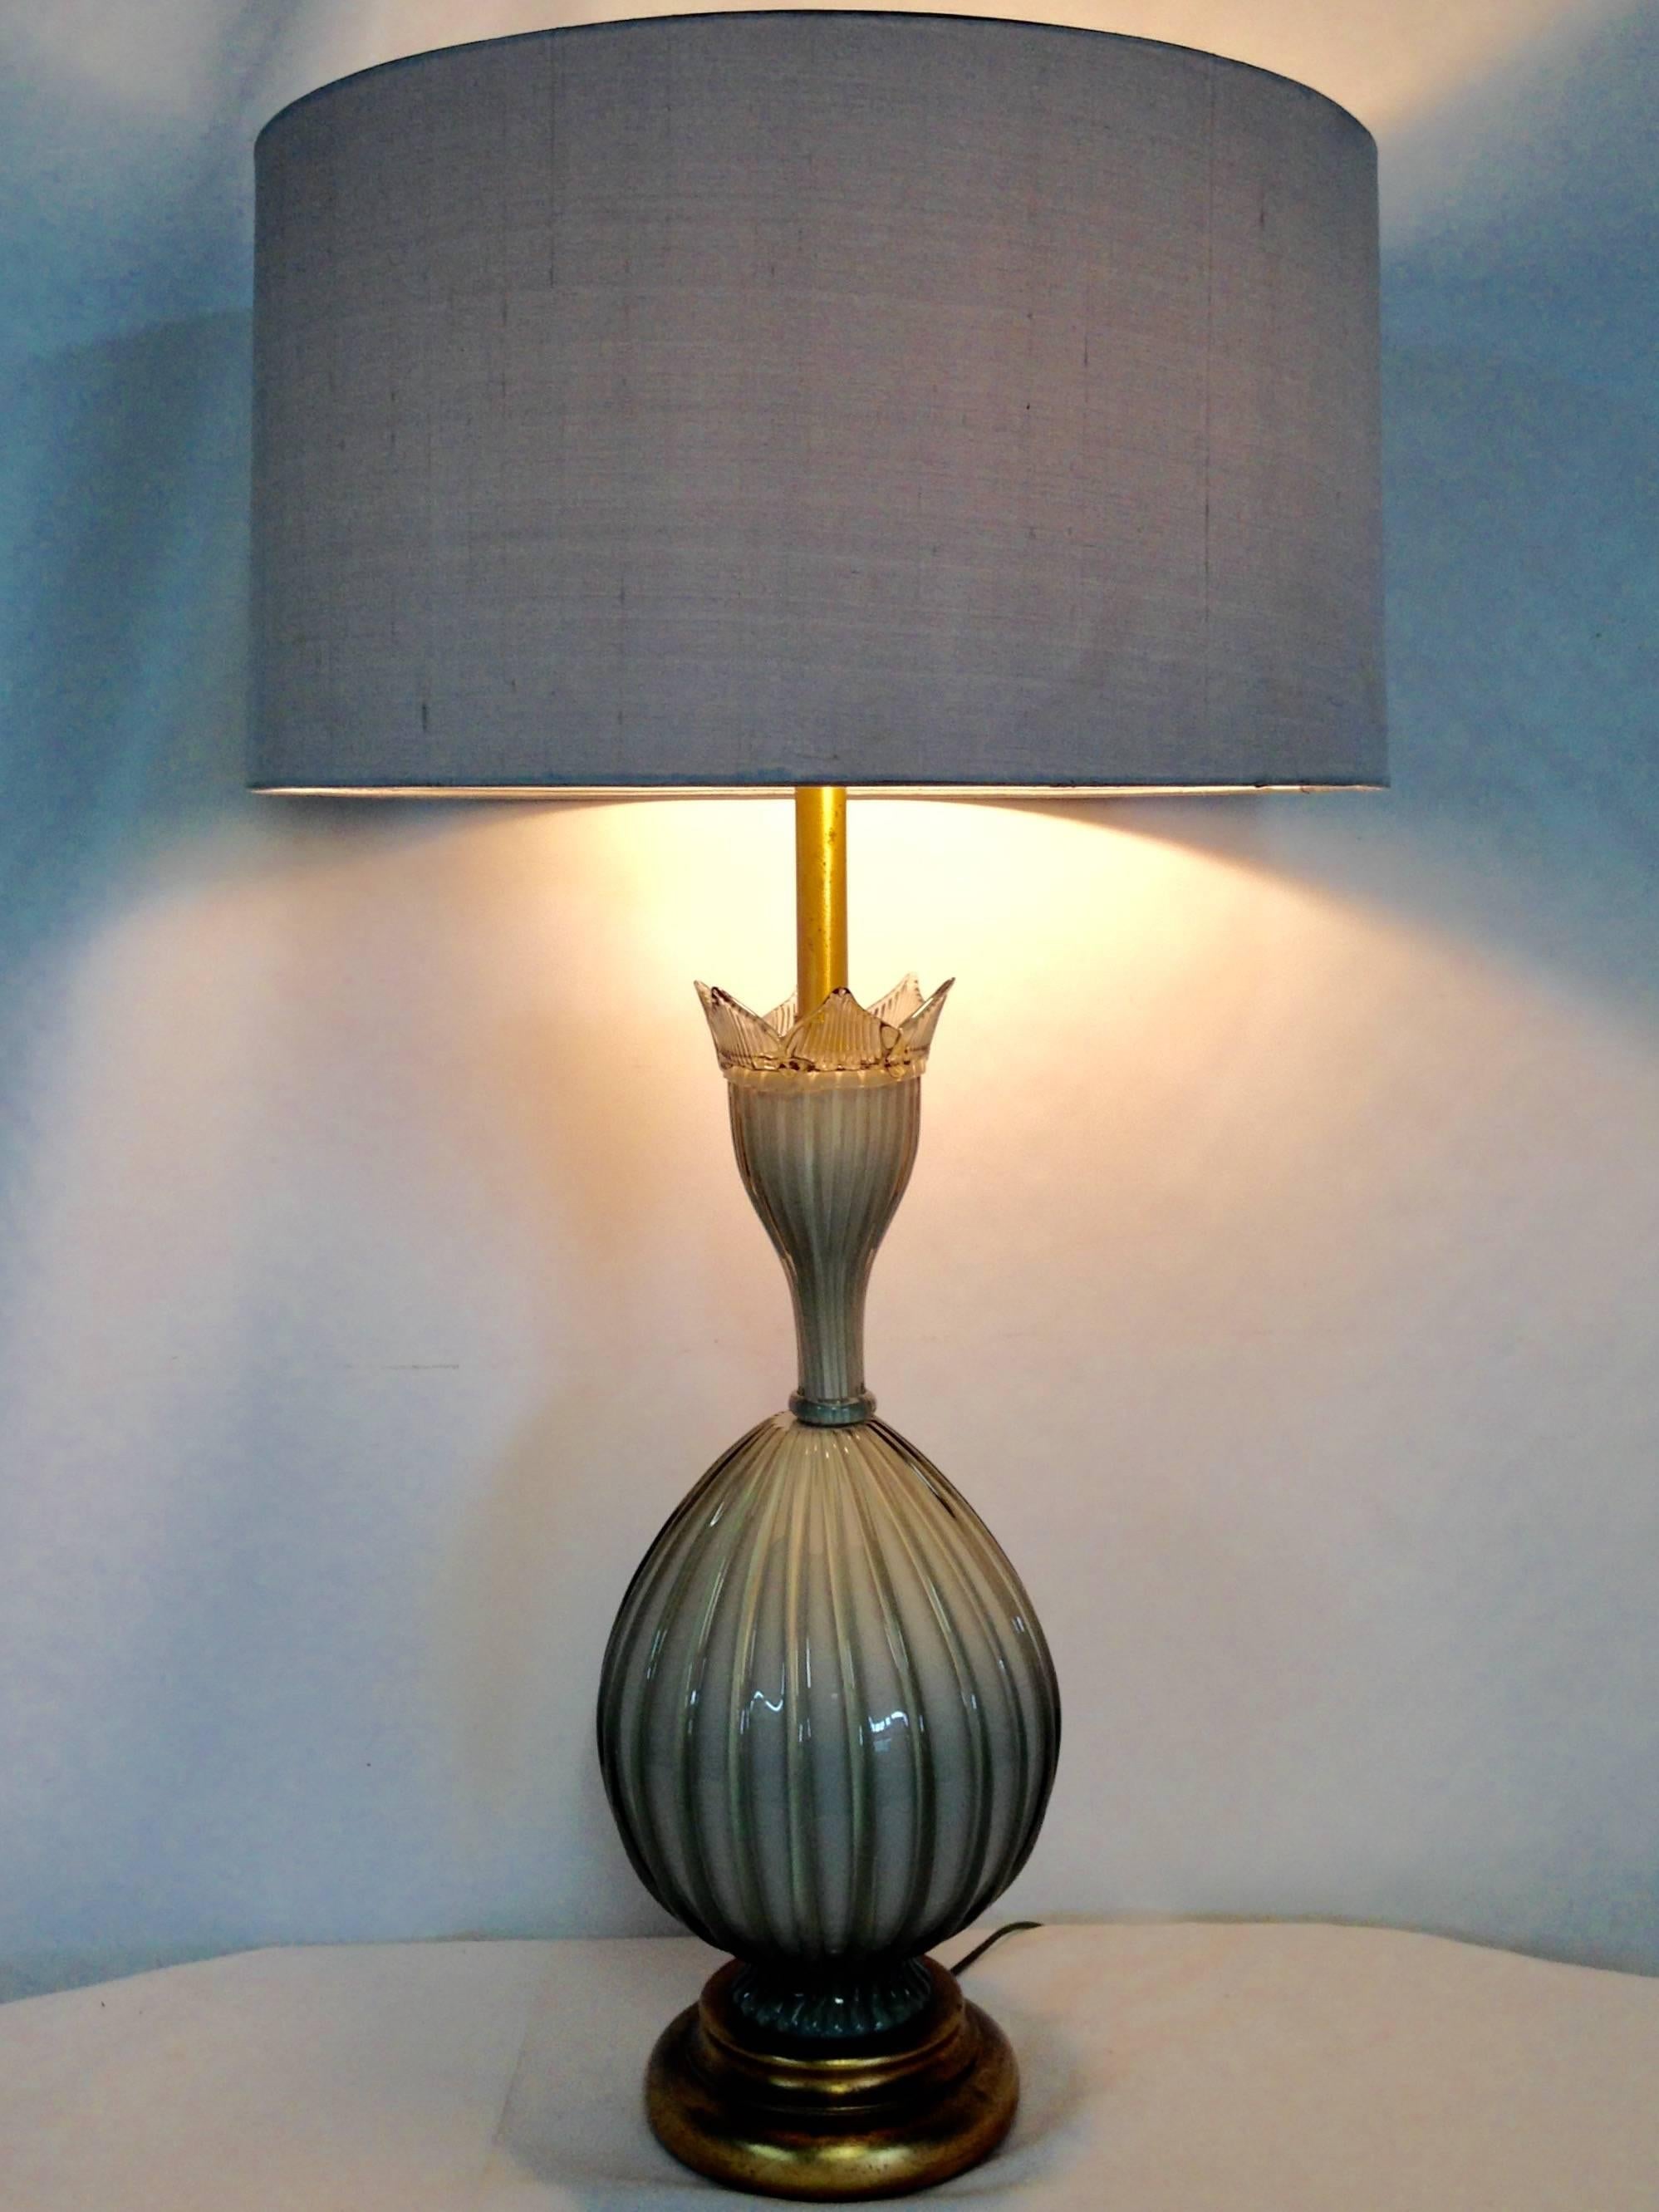 Vintage Italian Murano Glass Lamp By,  Marbro Lamp Company Features a sculptural rare ribbed sage gray Murano glass lamp on gilt wood base. Brass fittings and original Marbro manufacture's sticker in place. Wired for the US and in working order;